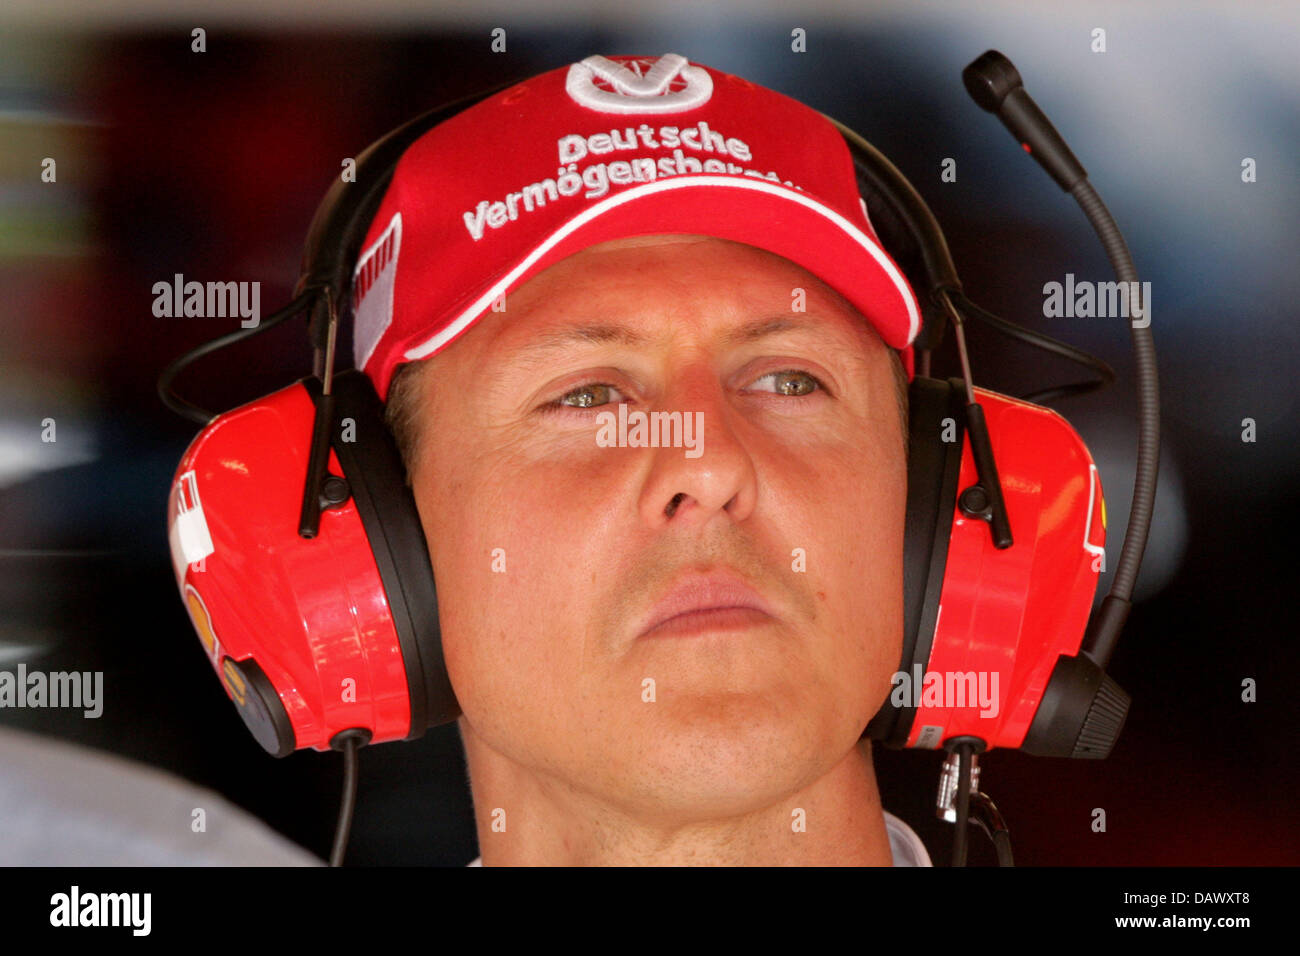 Former Formula One world champion Michael Schumacher is pictured in the Ferrari box during the third practice session at the Circuit de Catalunya race track near Barcelona, Spain, 12 May 2007. The 2007 Formula 1 Grand Prix of Spain takes place on 13 May. Photo: Jens Buettner Stock Photo